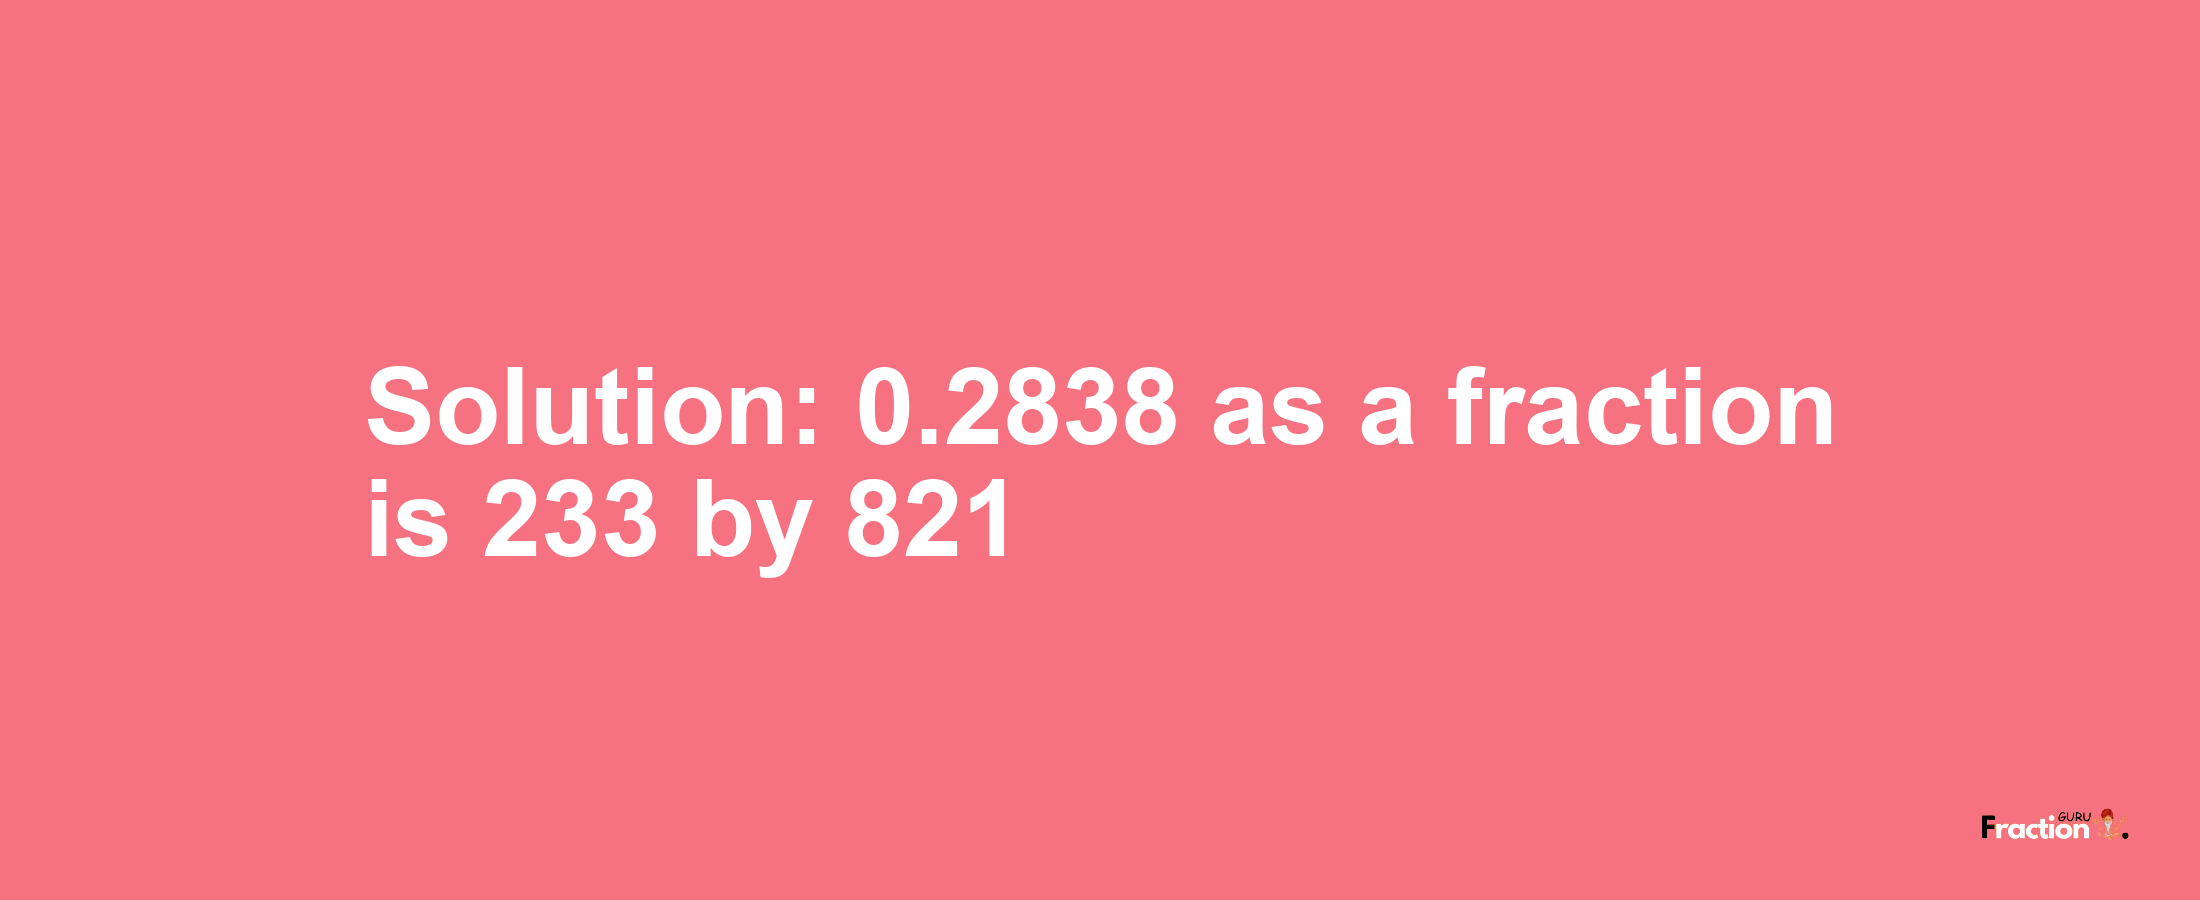 Solution:0.2838 as a fraction is 233/821